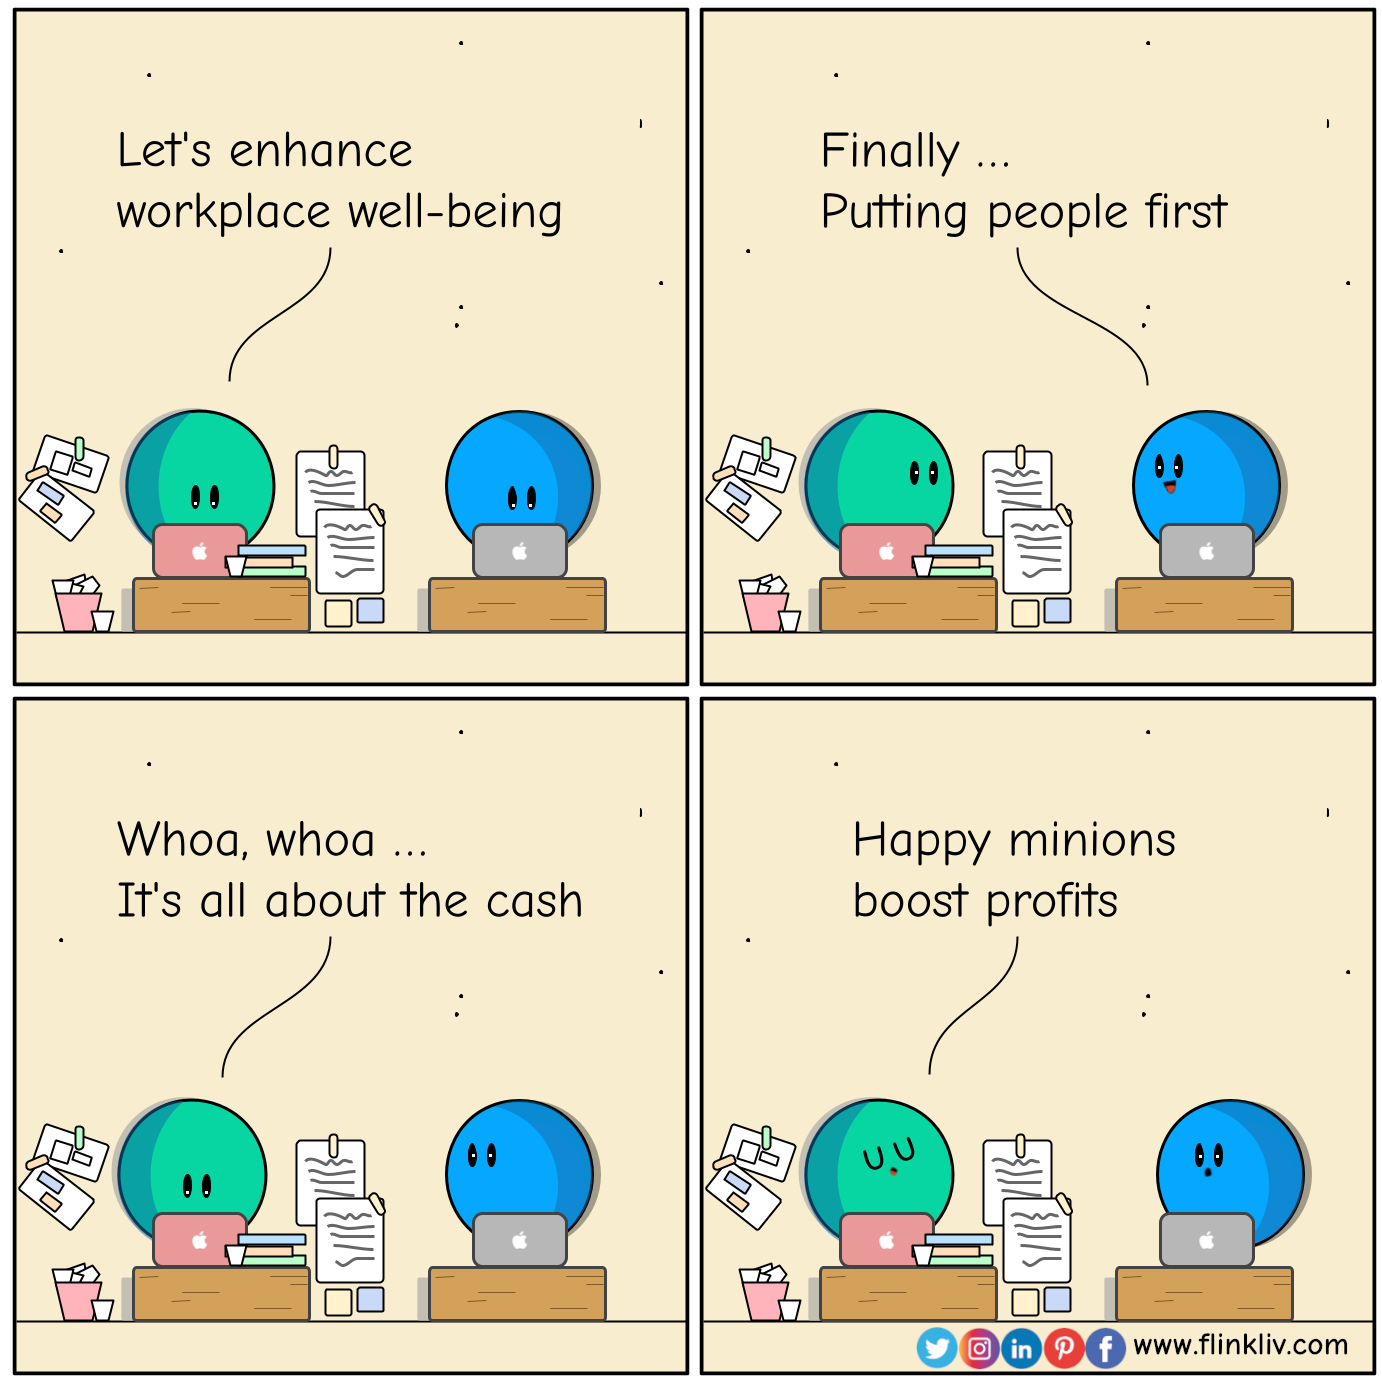 Conversation between A and B about well-being and profit.
				B: Let's enhance workplace well-being.
				A: Finally, putting people first?
				B: Whoa, whoa. t's all about the cash.
				B: Happy minions boost profits.
				By Flinkliv.com
            